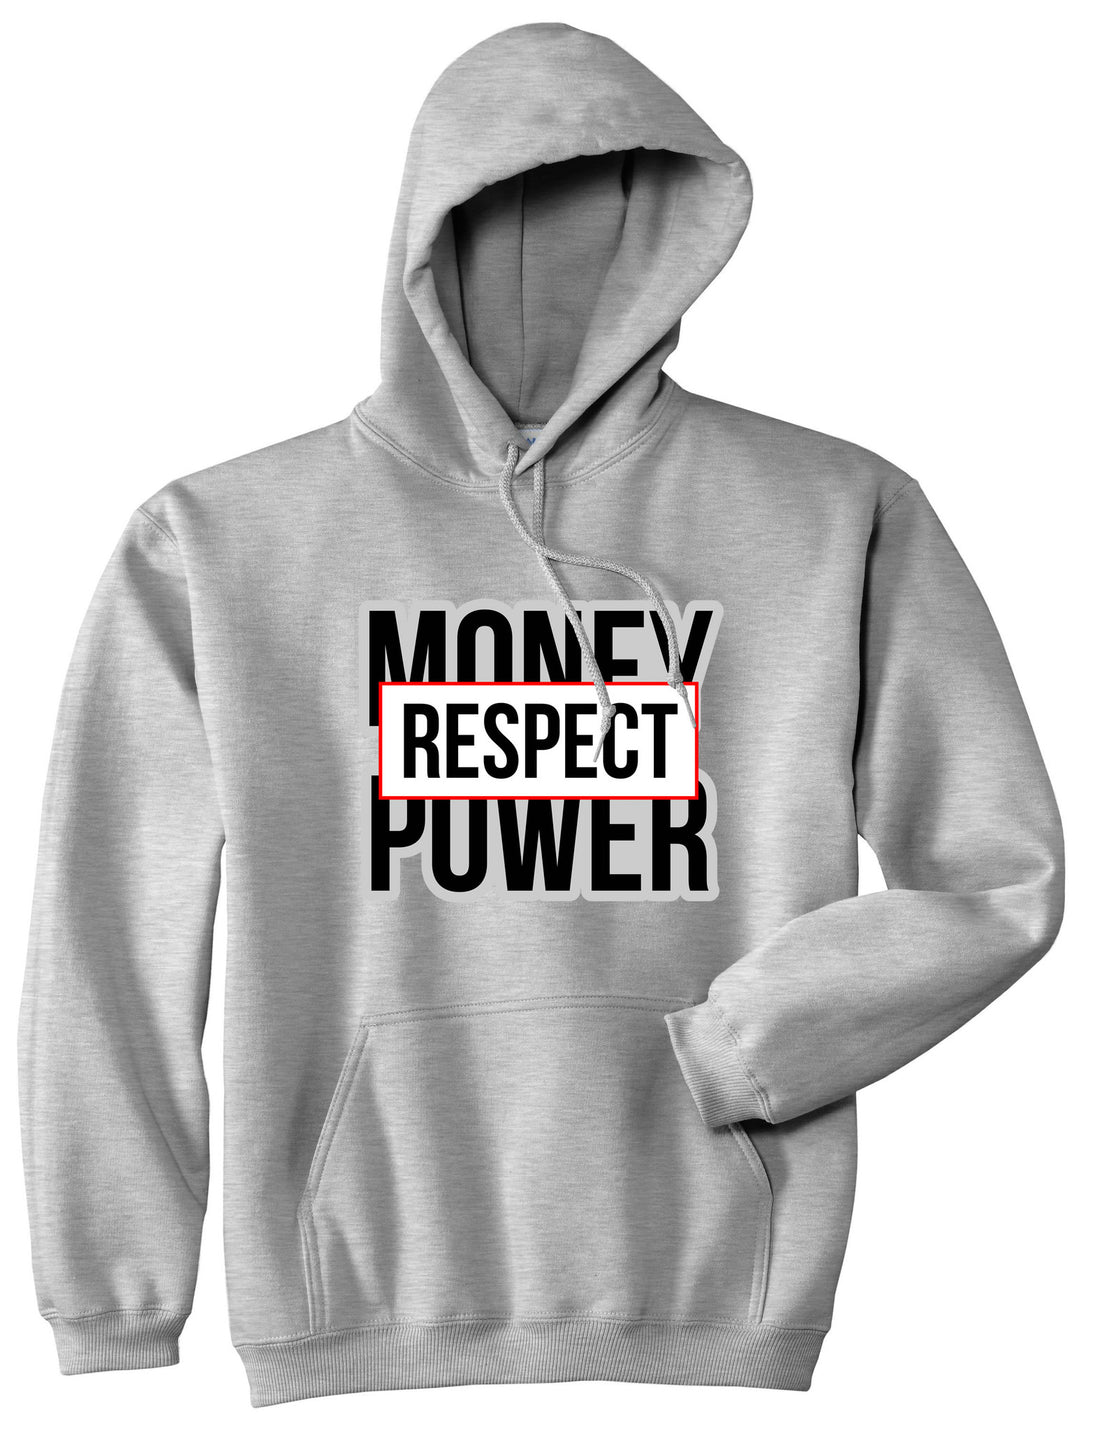 Money Power Respect Boys Kids Pullover Hoodie Hoody in Grey By Kings Of NY